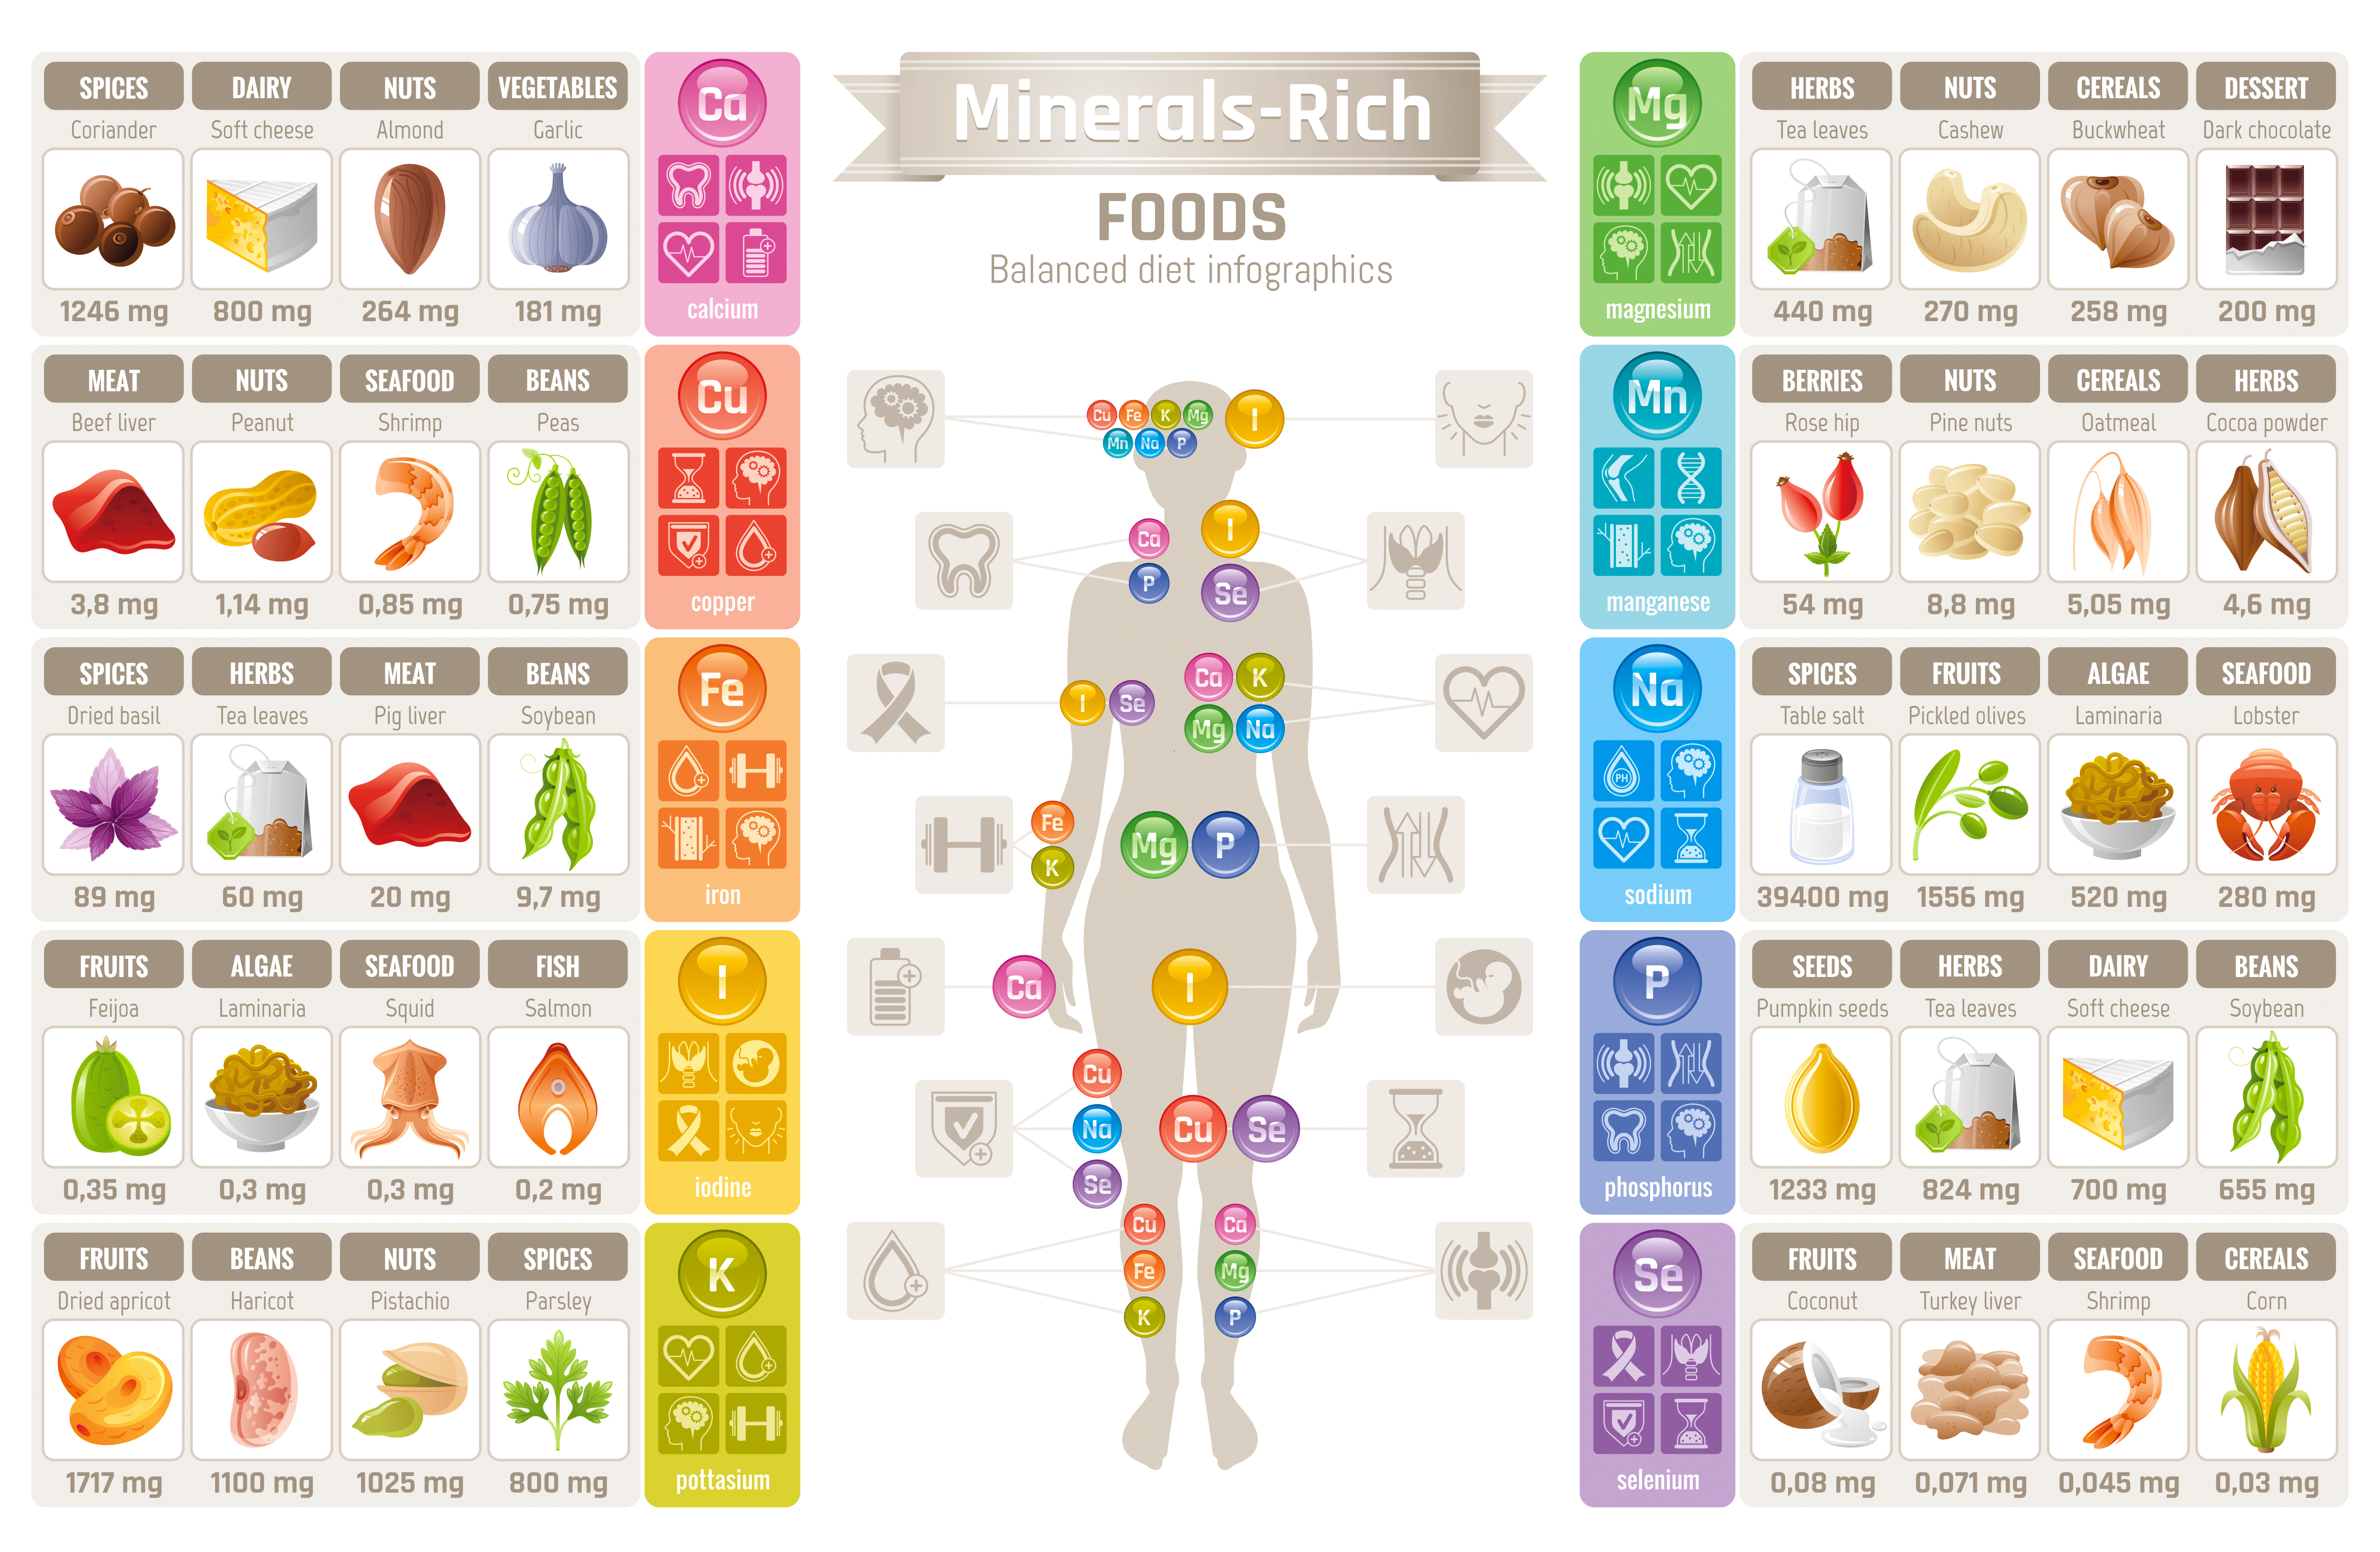 If you don't want to supplement vitamins and minerals preparations, take strict care over your diet. You can use this infographic to find out where to look for conrete minerals!